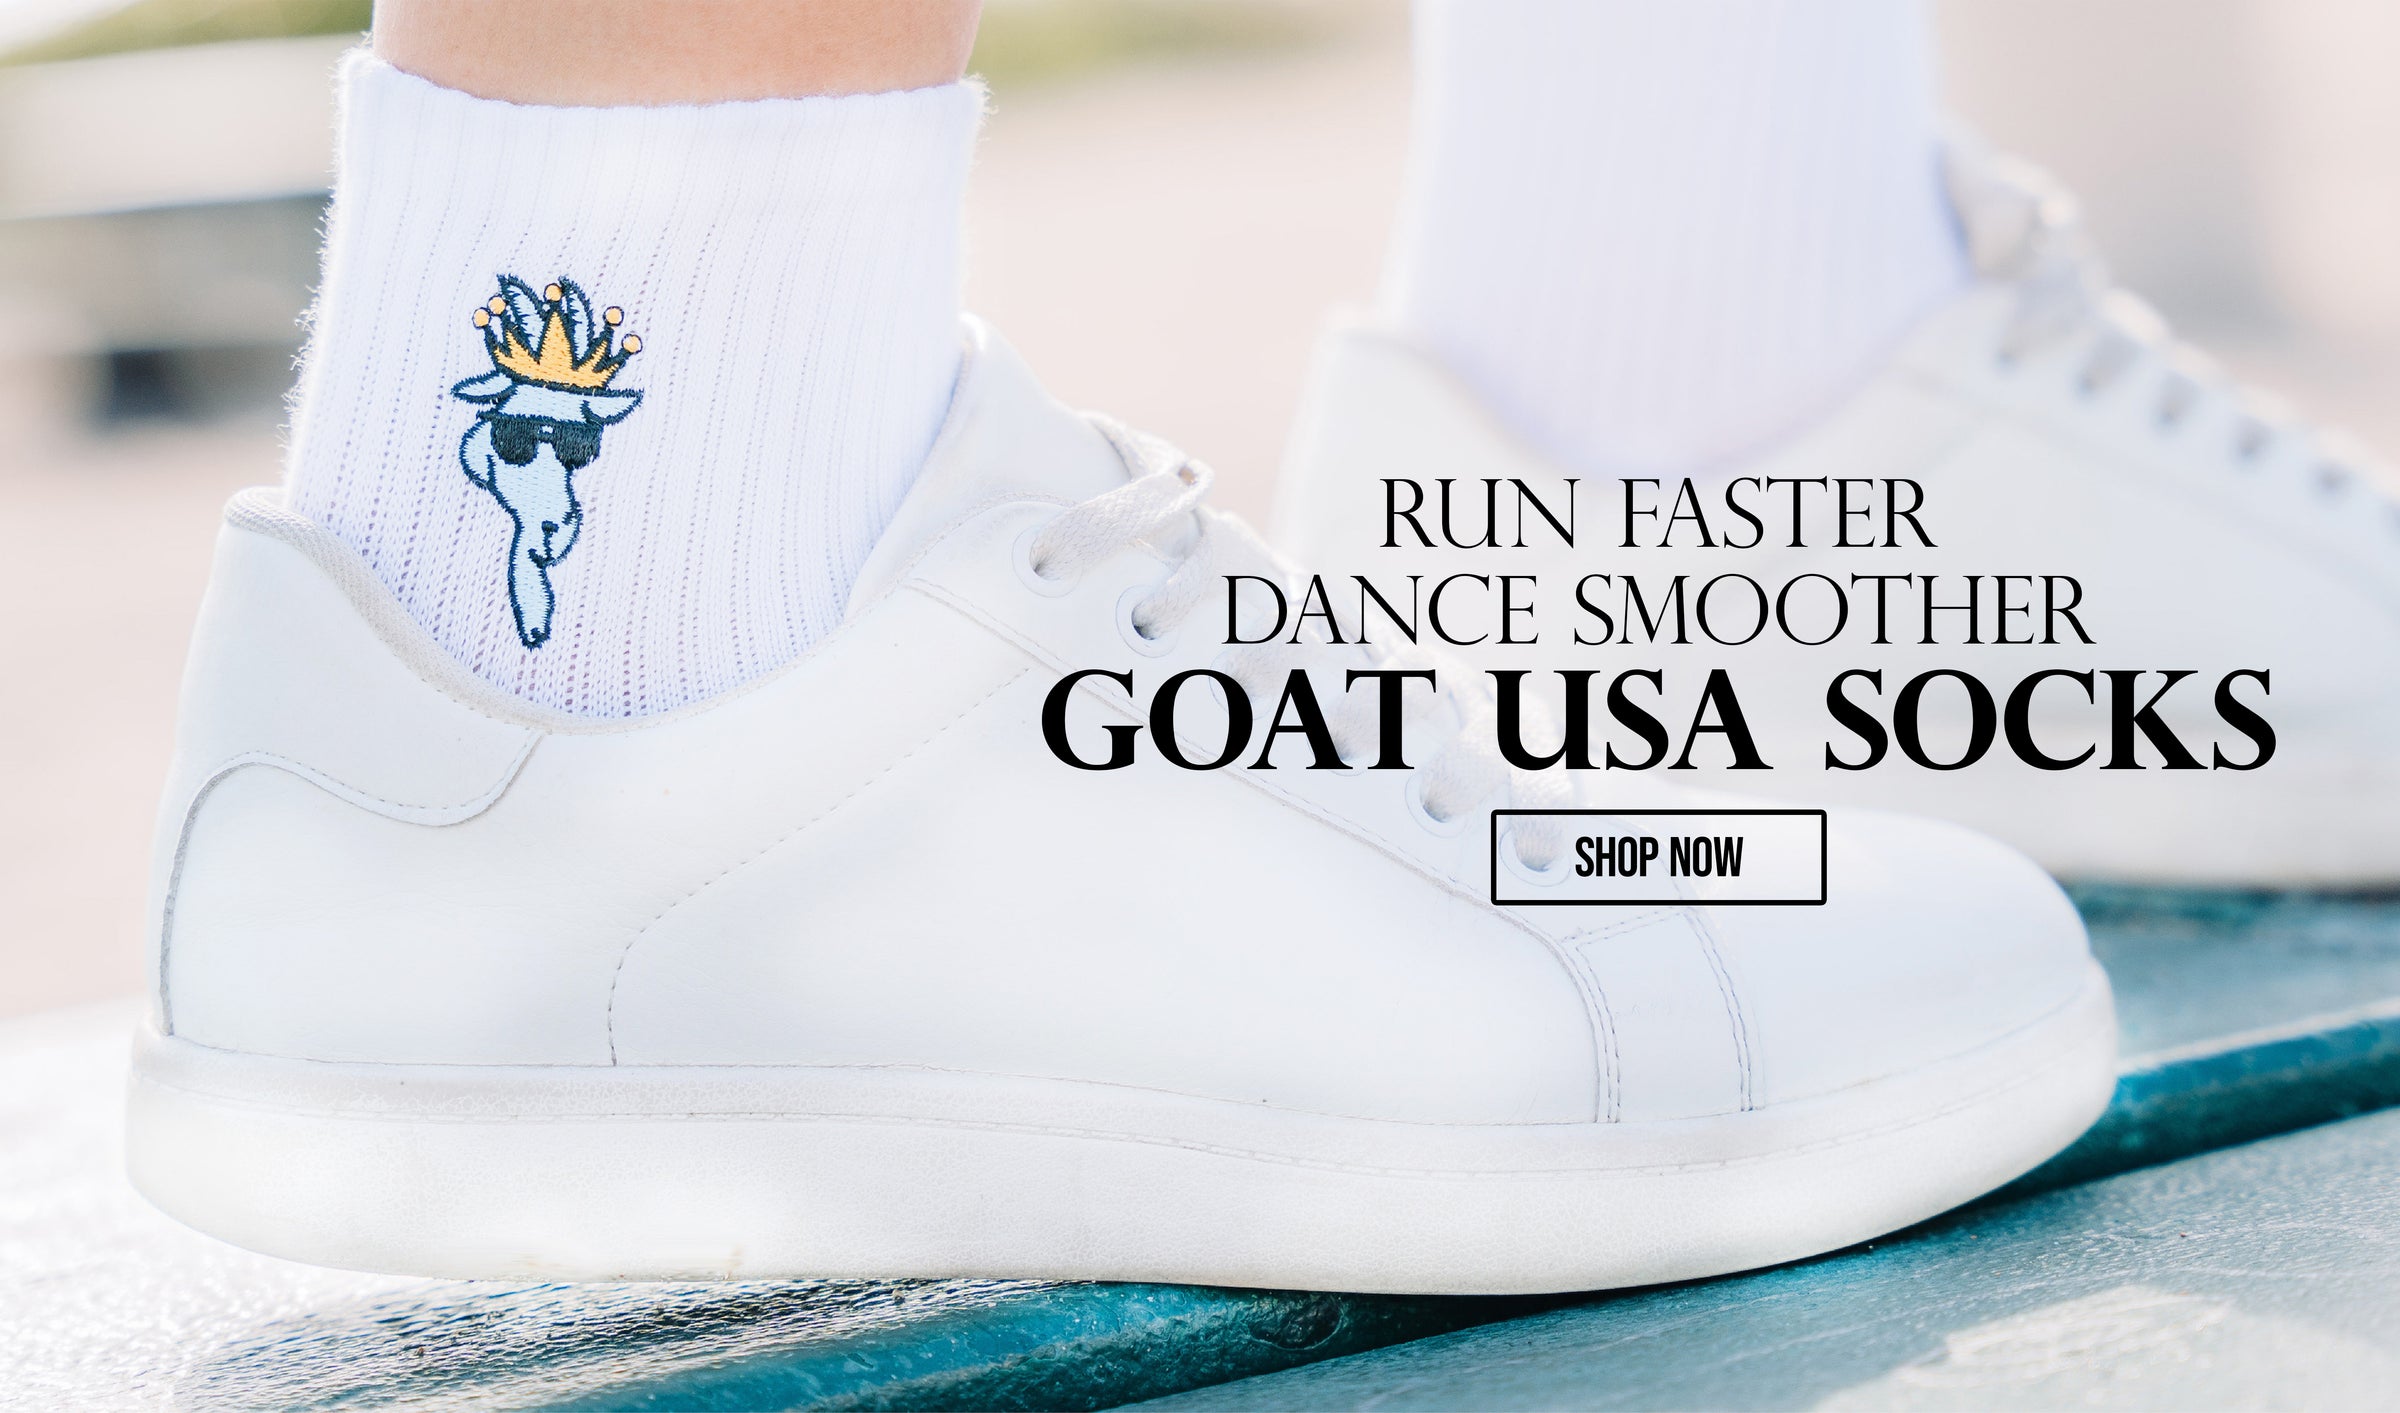 GOAT USA Socks graphic linked to Socks collection